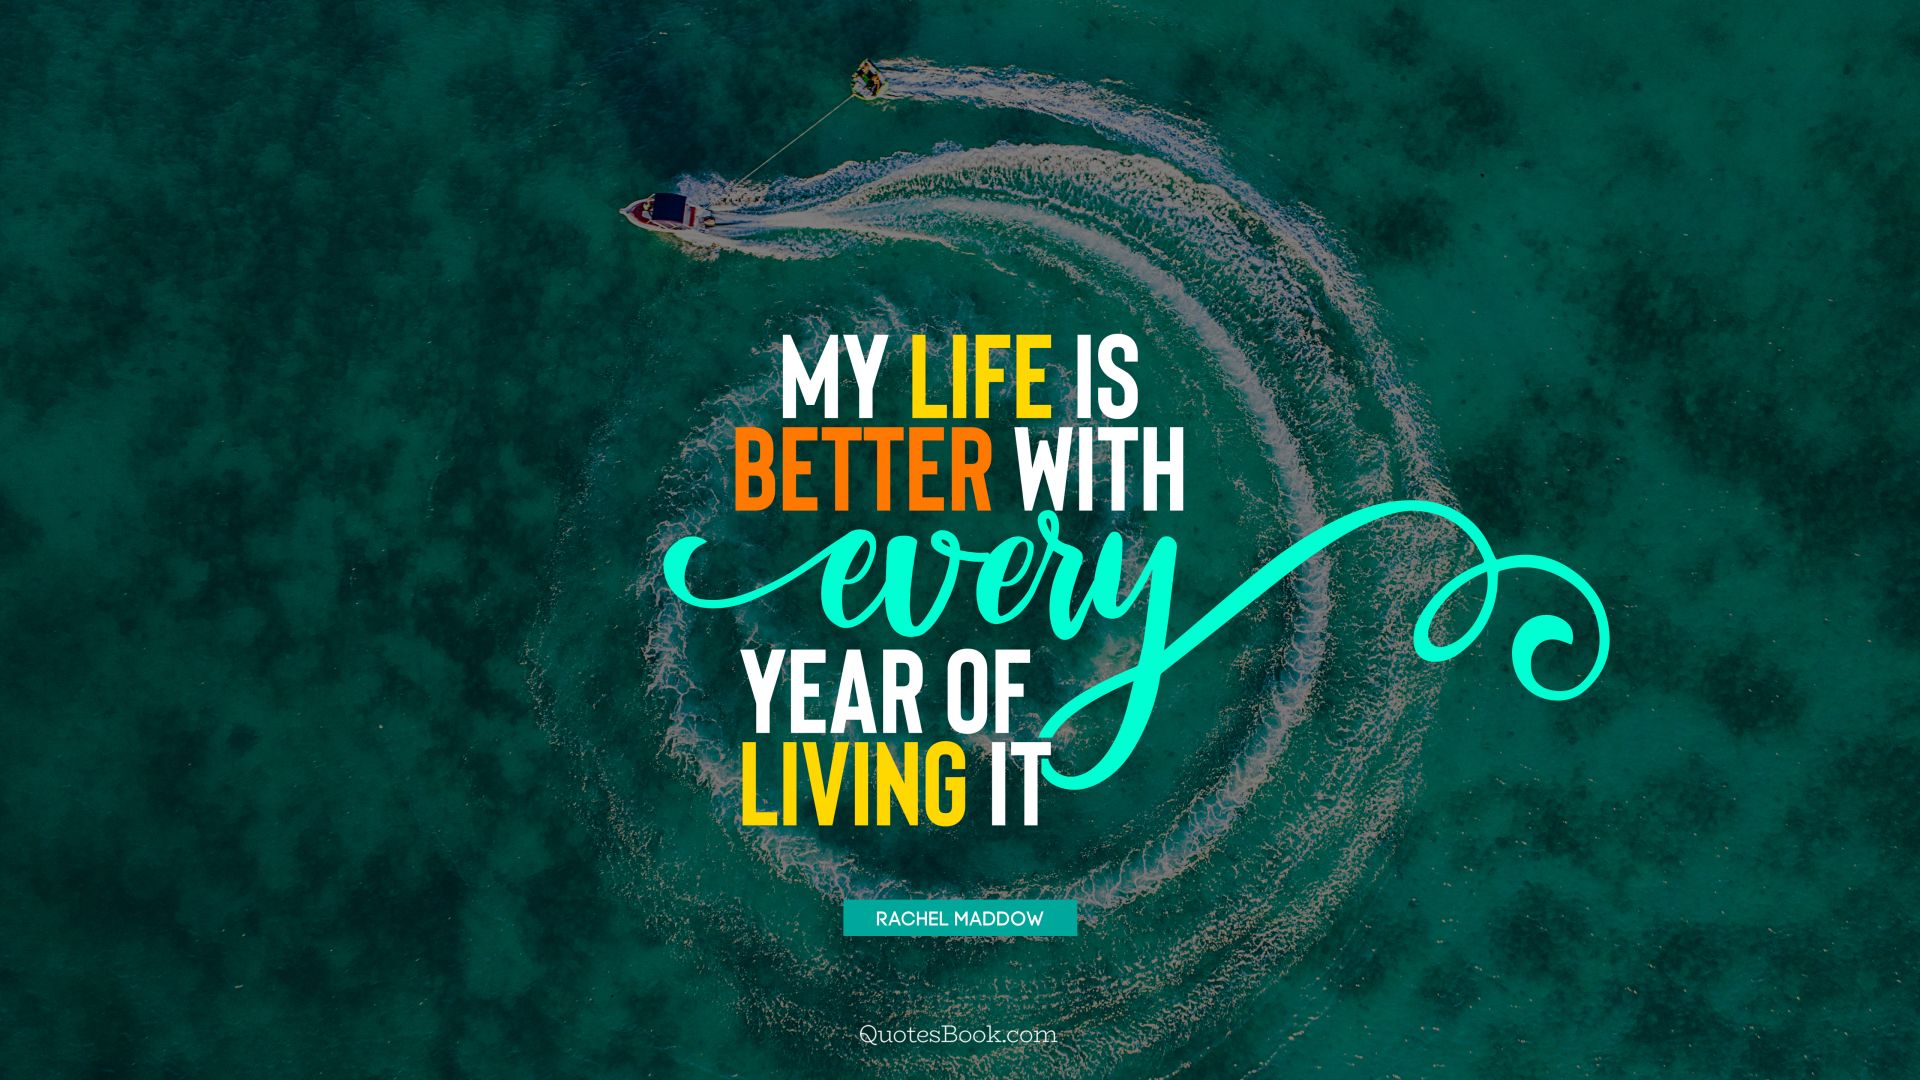 My life is better with every year of living it. - Quote by Rachel Maddow